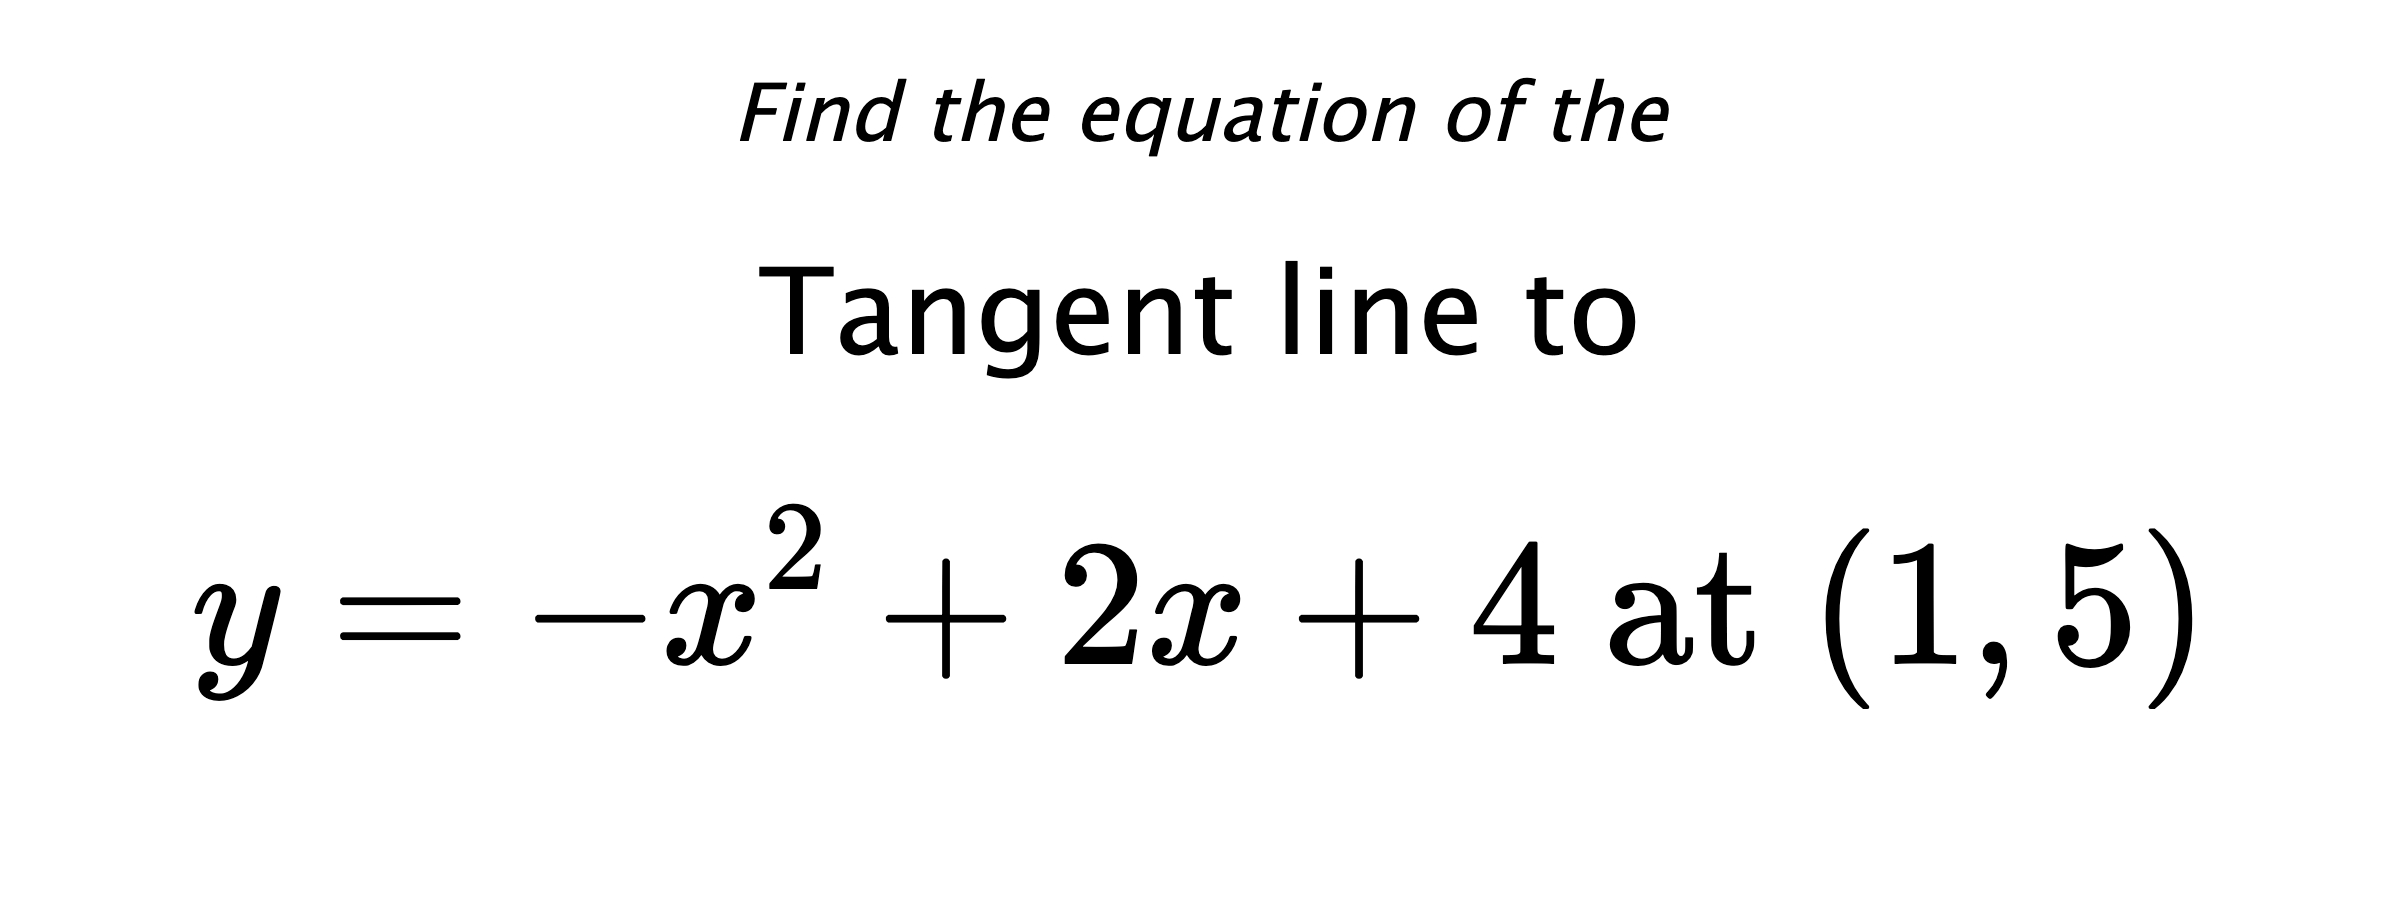 Find the equation of the Tangent line to $$ y=-x^2+2x+4 \text{ at } (1,5) $$